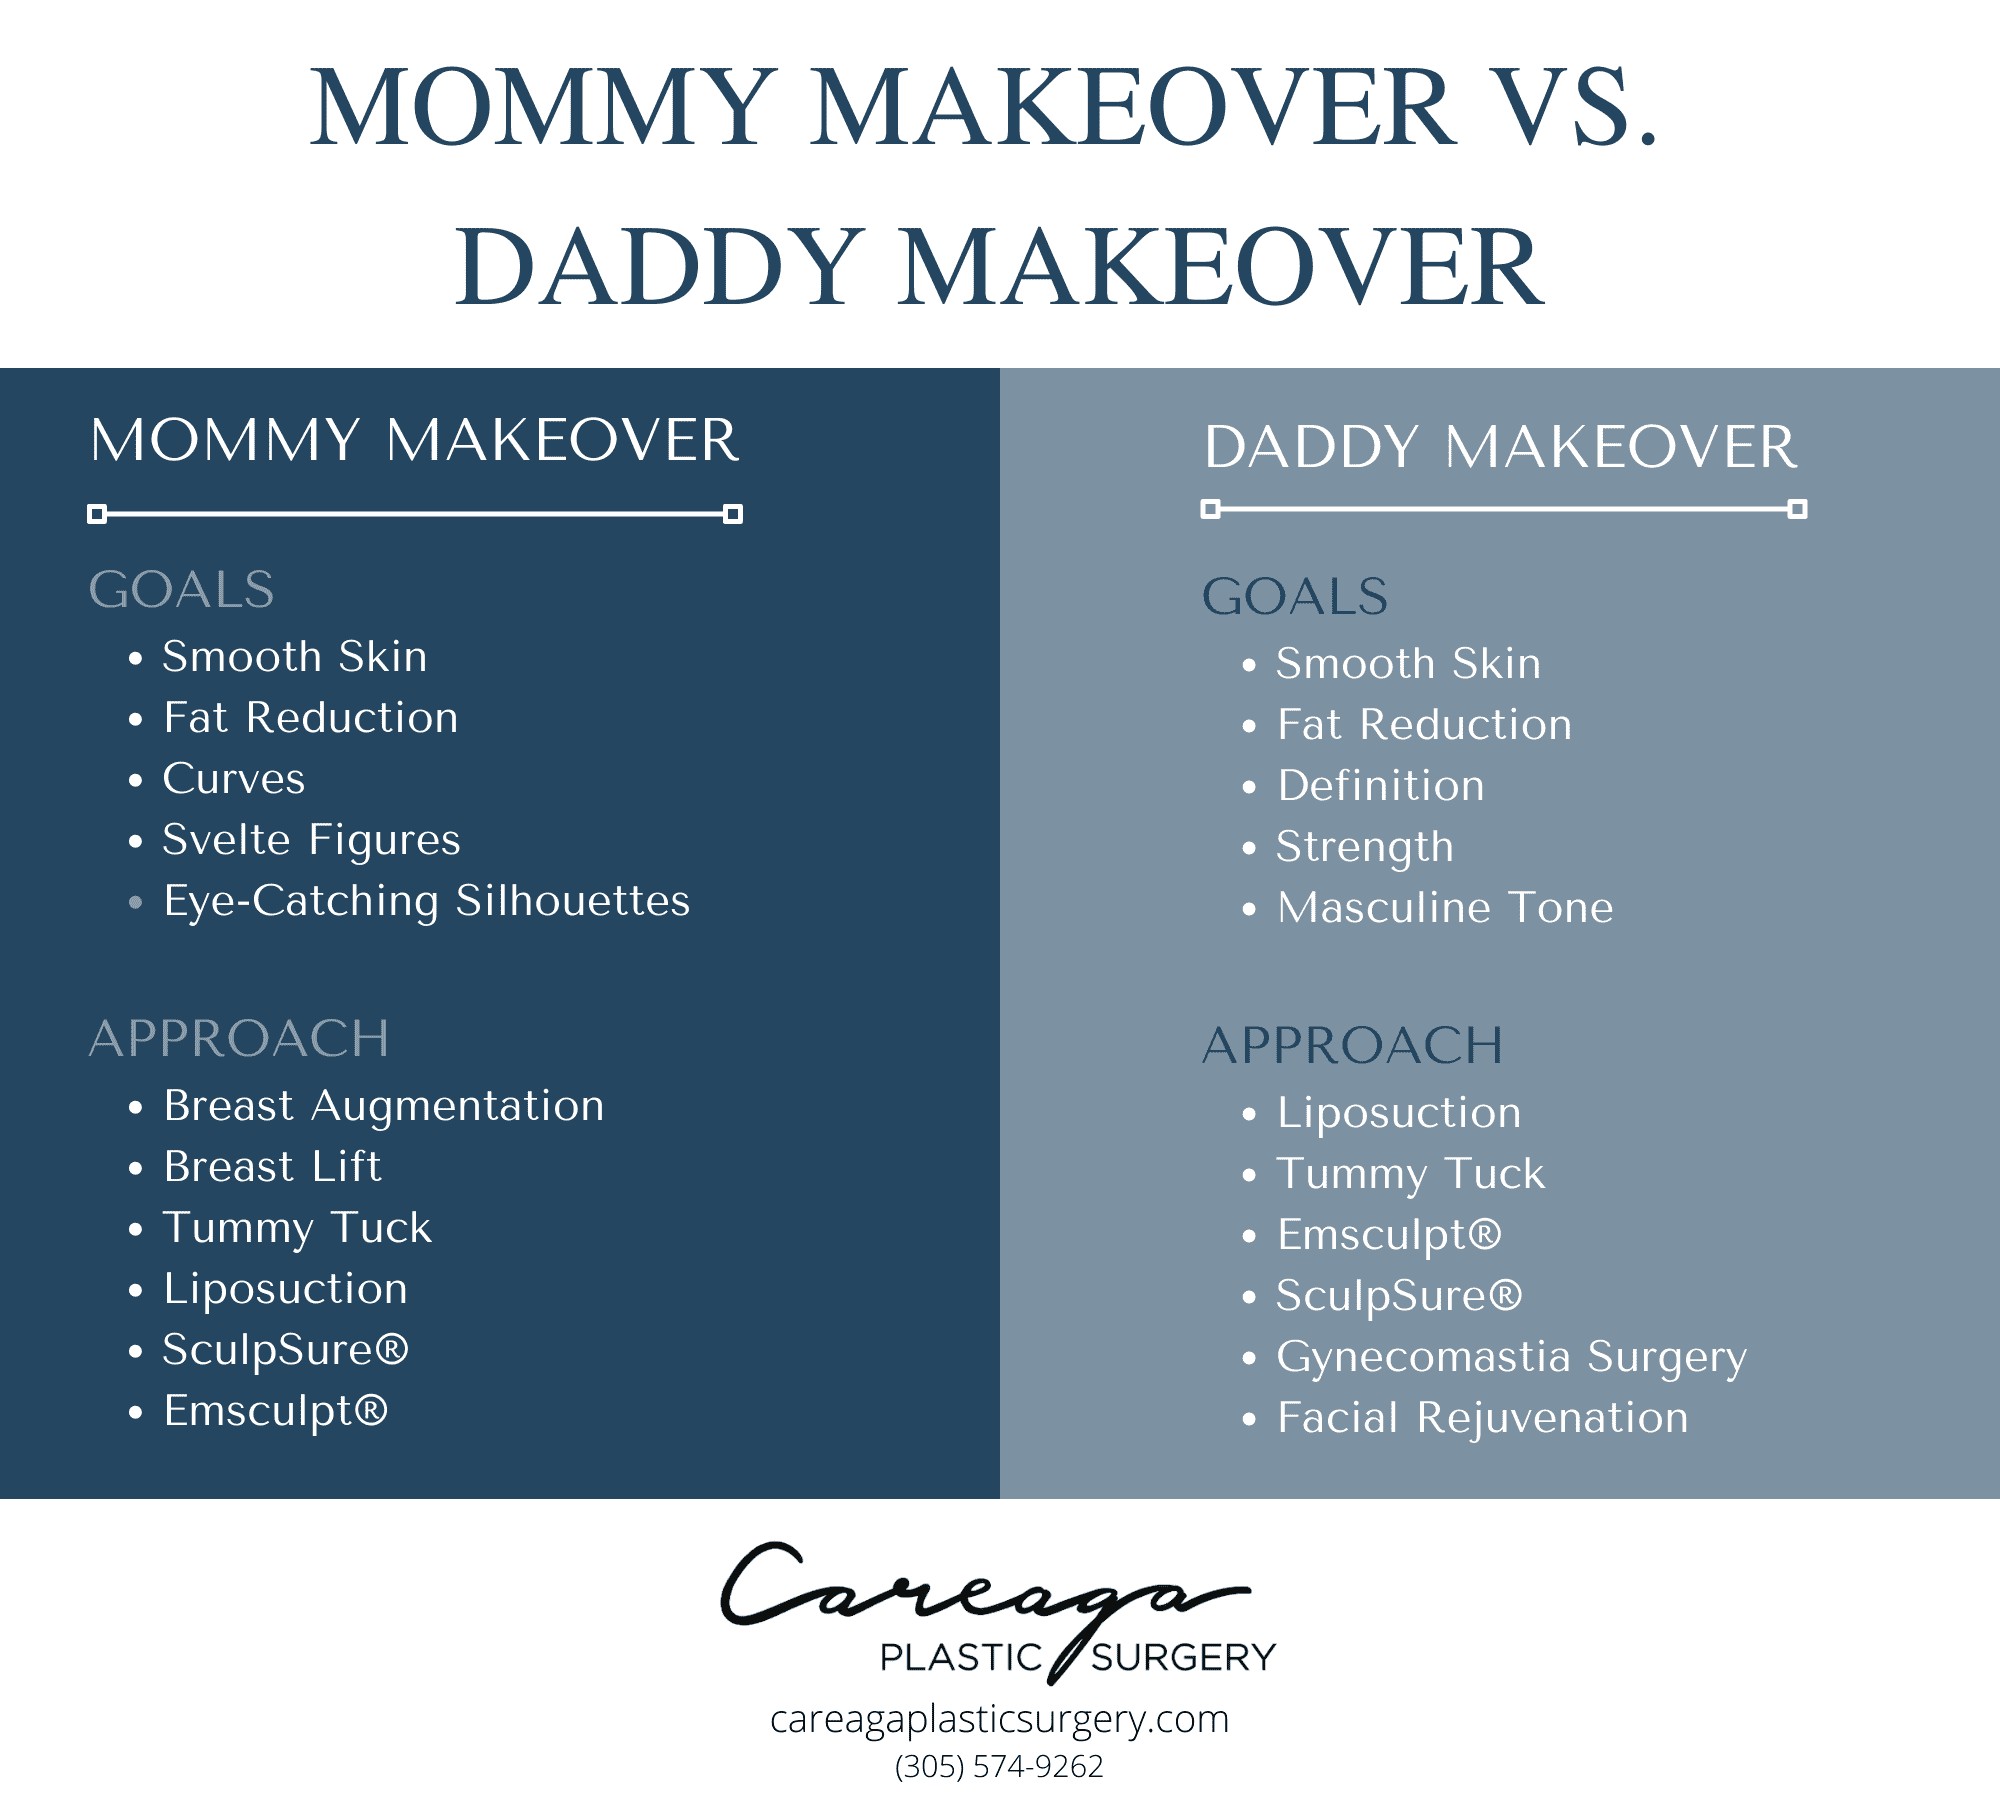 Infographic demonstrating the differences between the Mommy Makeover and the Daddy Makeover.